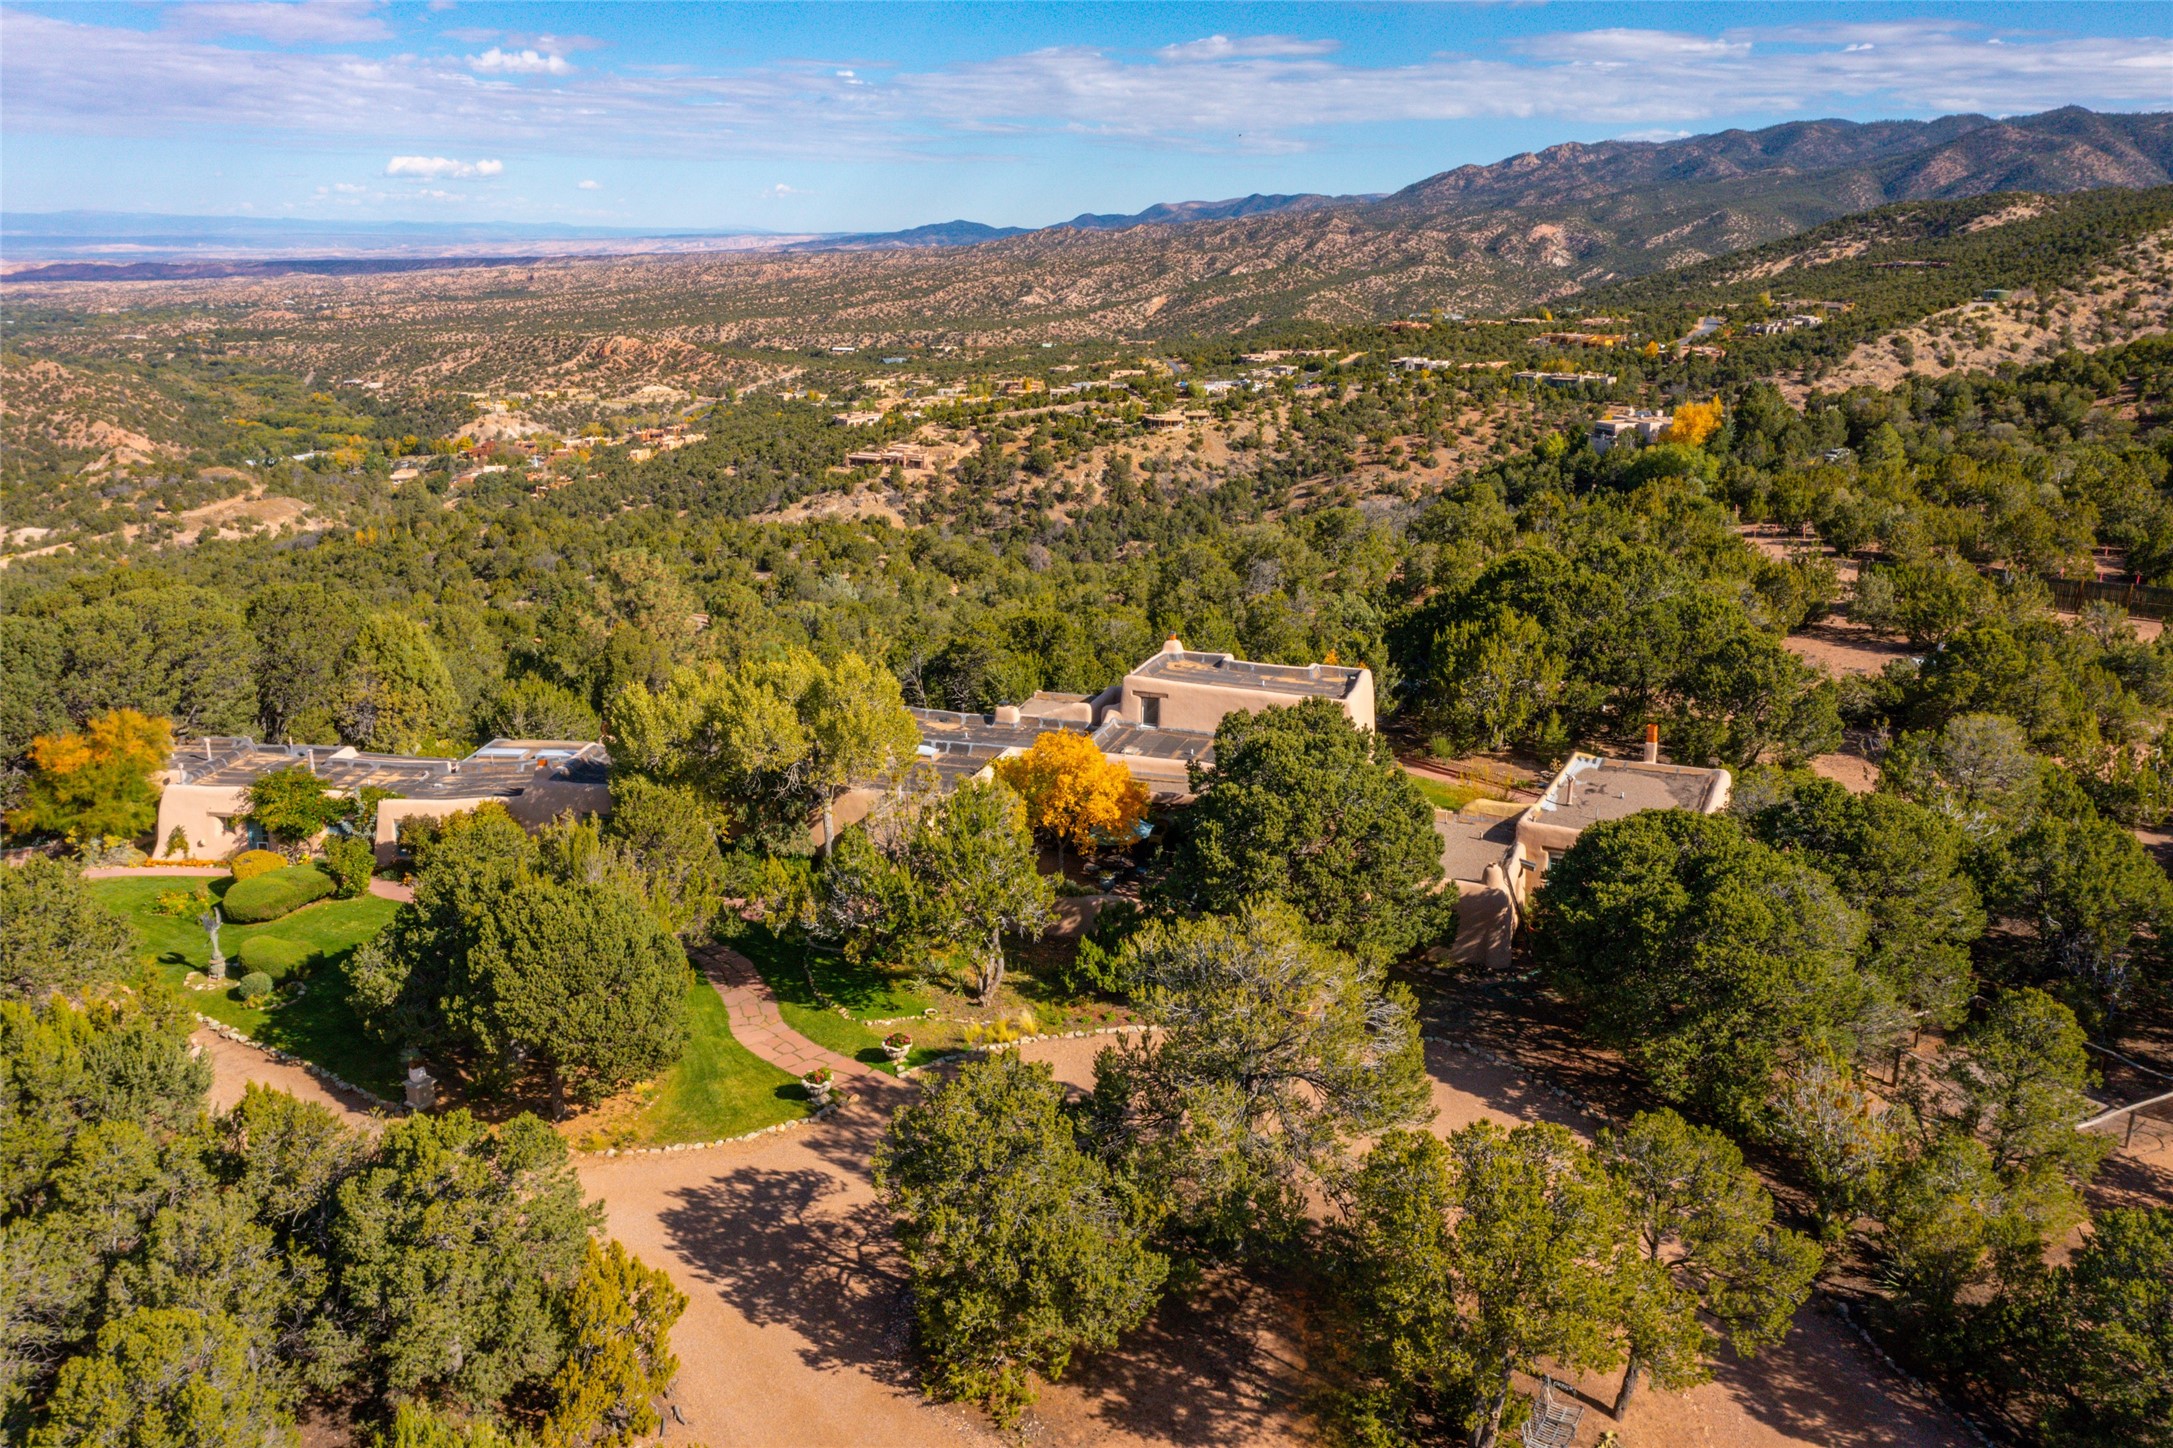 185 Brownell Howland, Santa Fe, New Mexico 87501, 5 Bedrooms Bedrooms, ,6 BathroomsBathrooms,Residential,For Sale,185 Brownell Howland,202341636